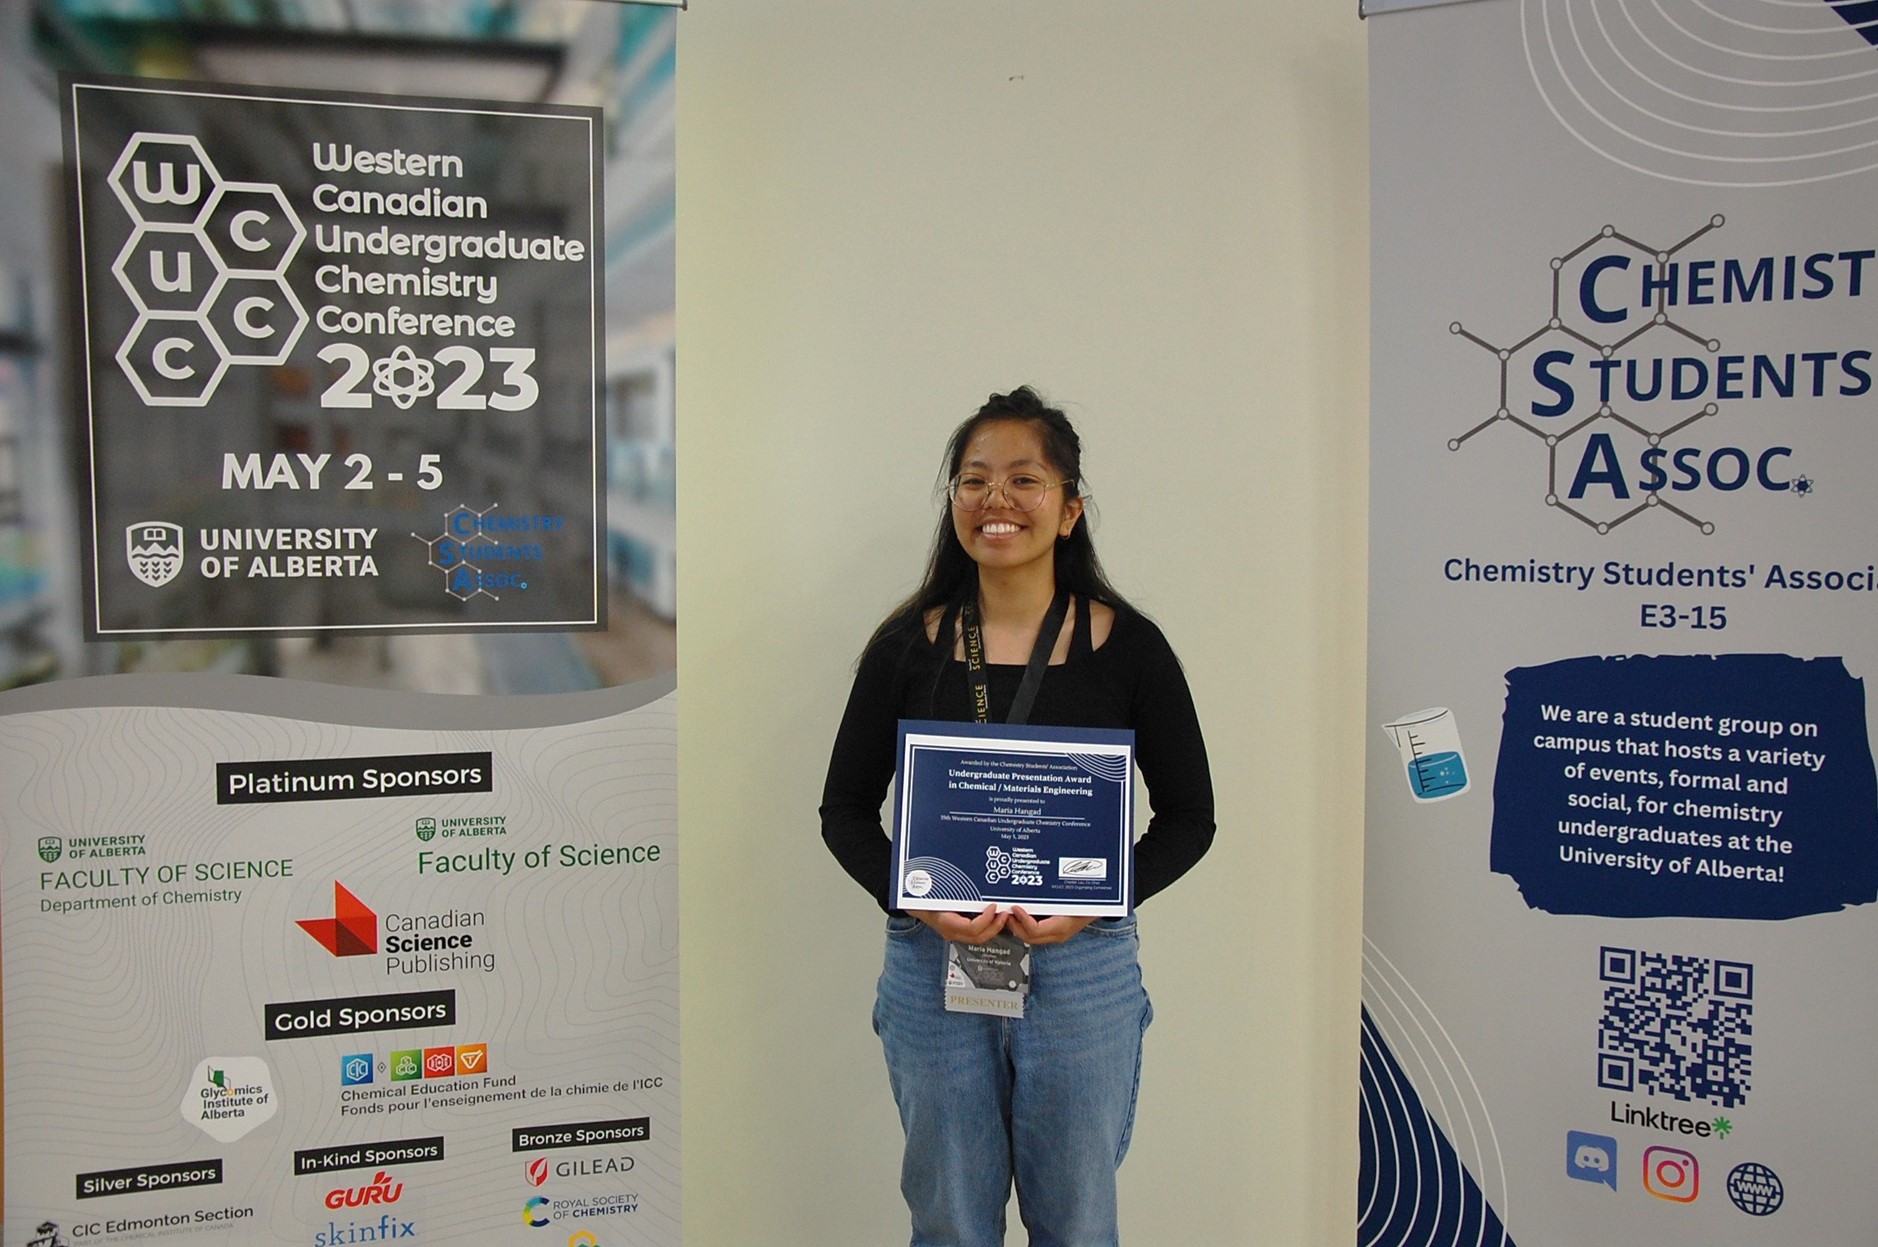 Maria Hangad standing between posters for the Western Canadian Undergraduate Chemistry Conference 2023 and the Chemistry Students Association.